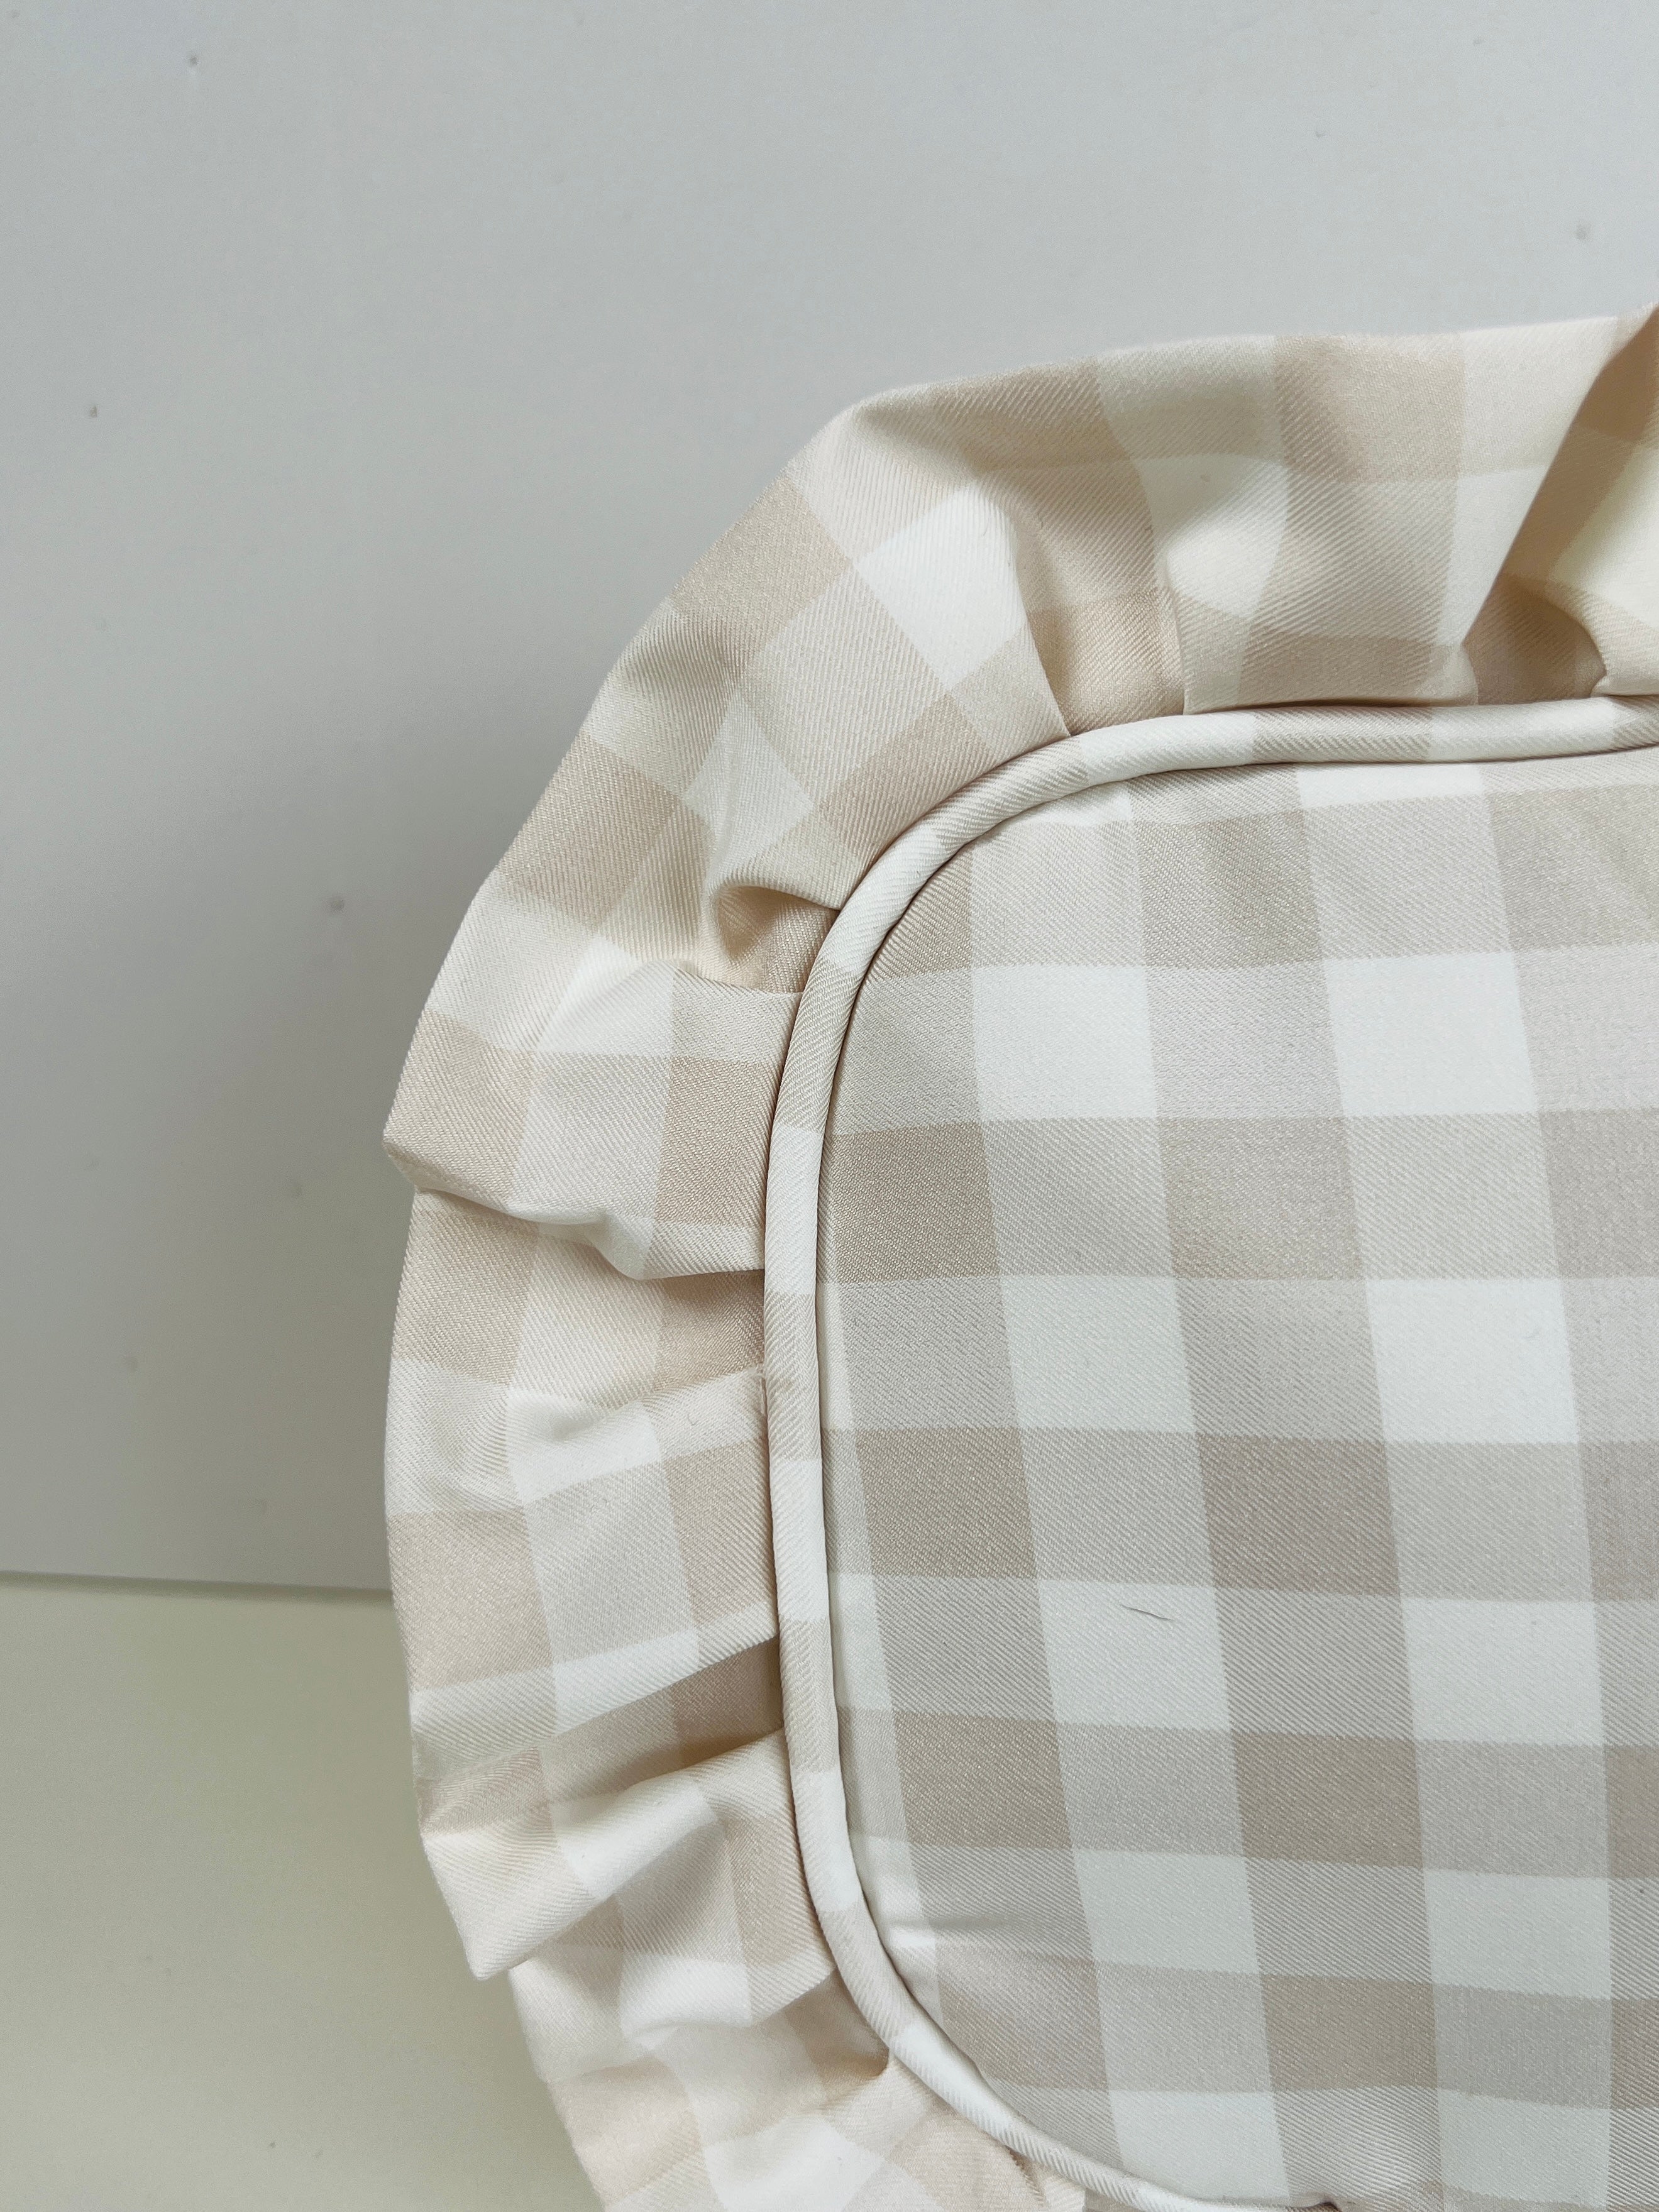 Gingham nylon accessory bag, monogram available in